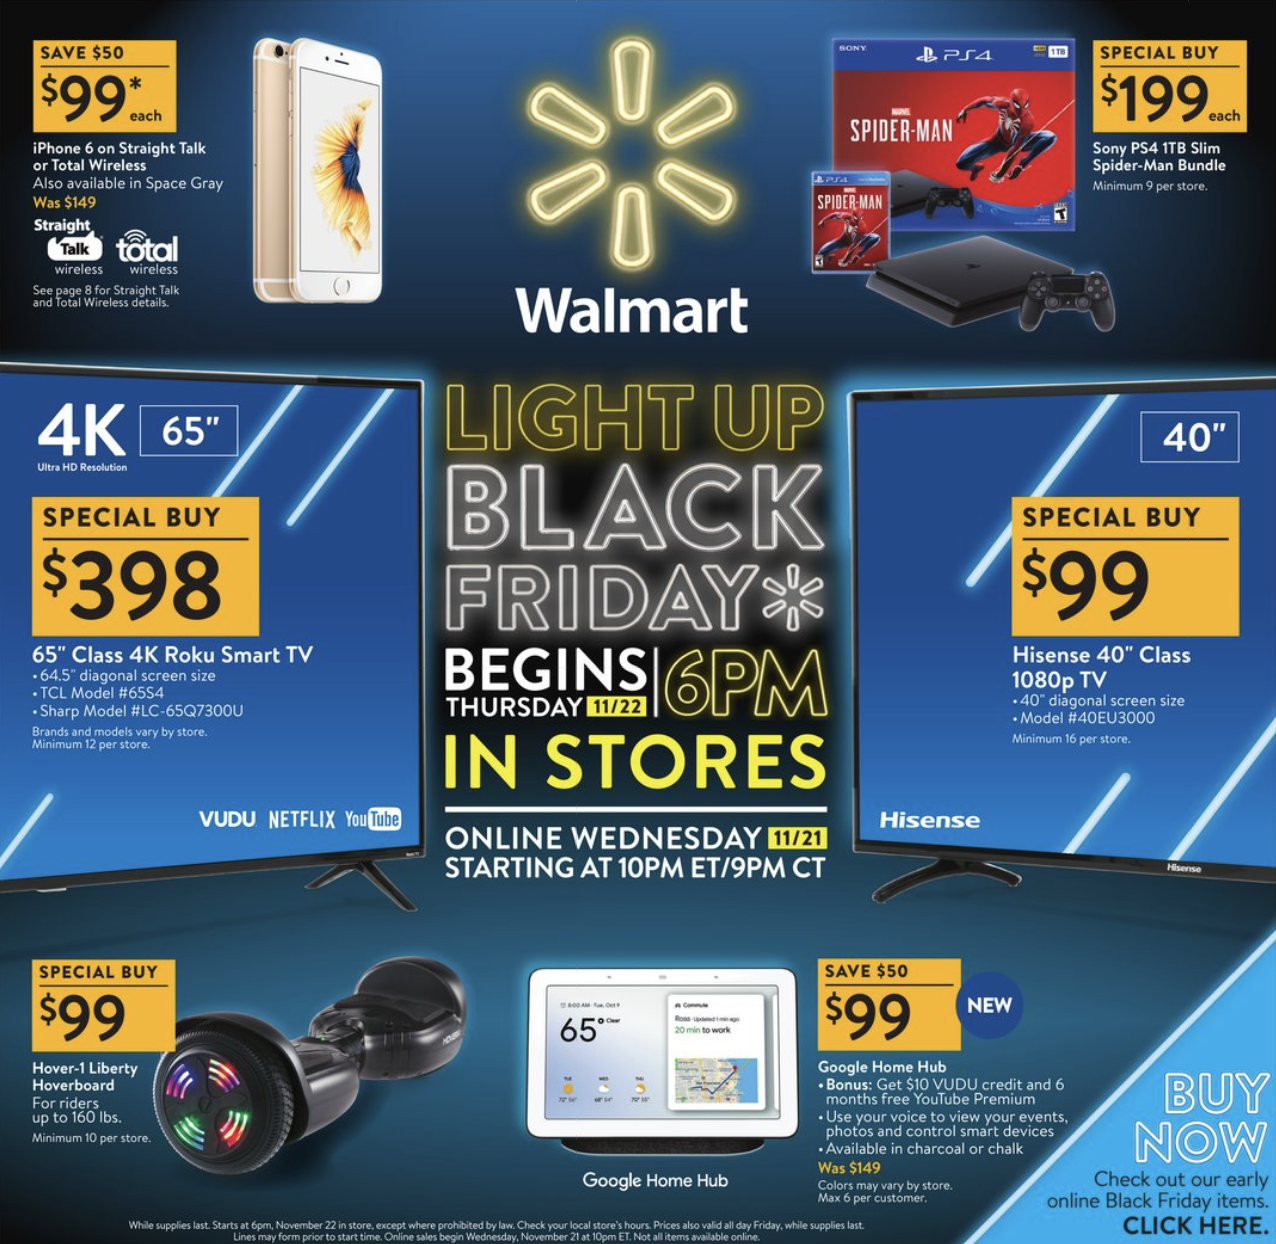 The Best Deals From the 2018 Walmart Black Friday Ad - Who Has The Best Black Friday Deal